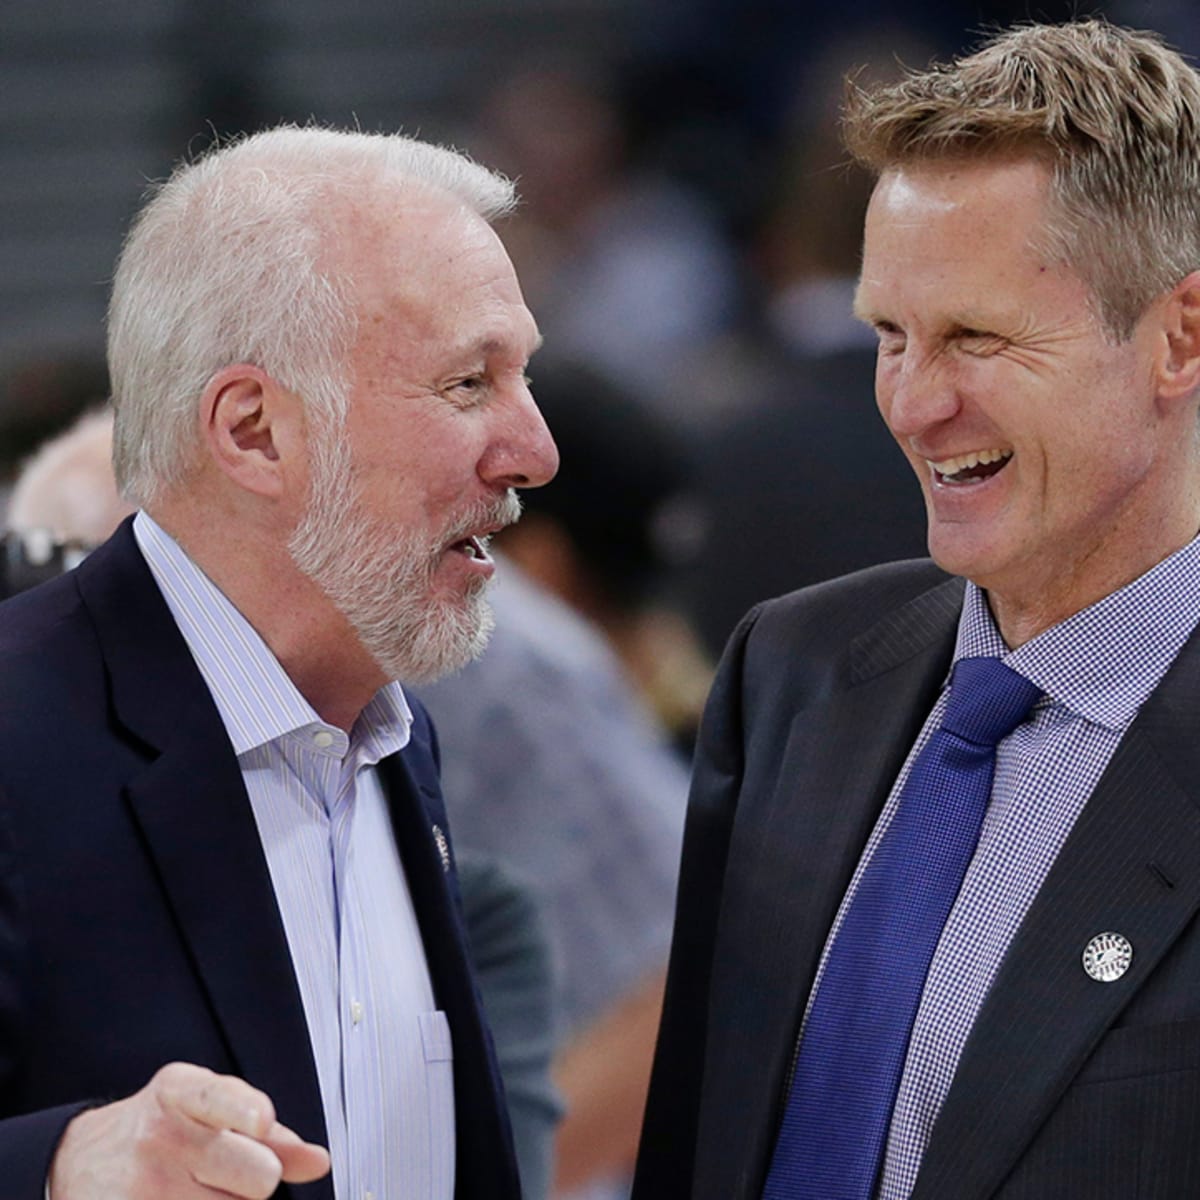 Steve Kerr pokes fun at LeBron's now-infamous press conference walkout